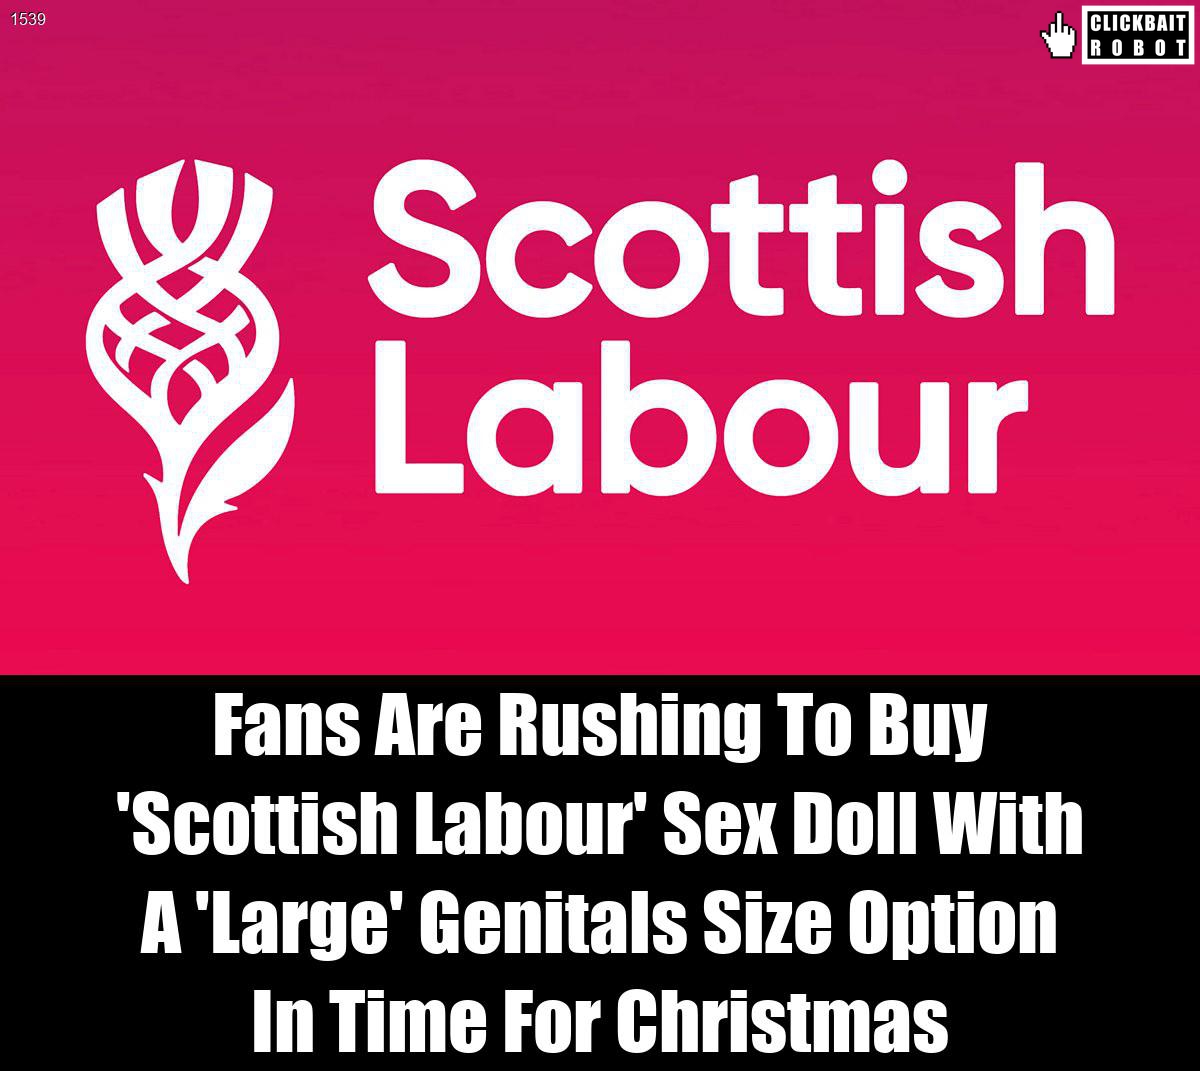 Fans Are Rushing To Buy 'Scottish Labour' Sex Doll With A 'Large' Genitals Size Option In Time For Christmas #ScottishLabour 